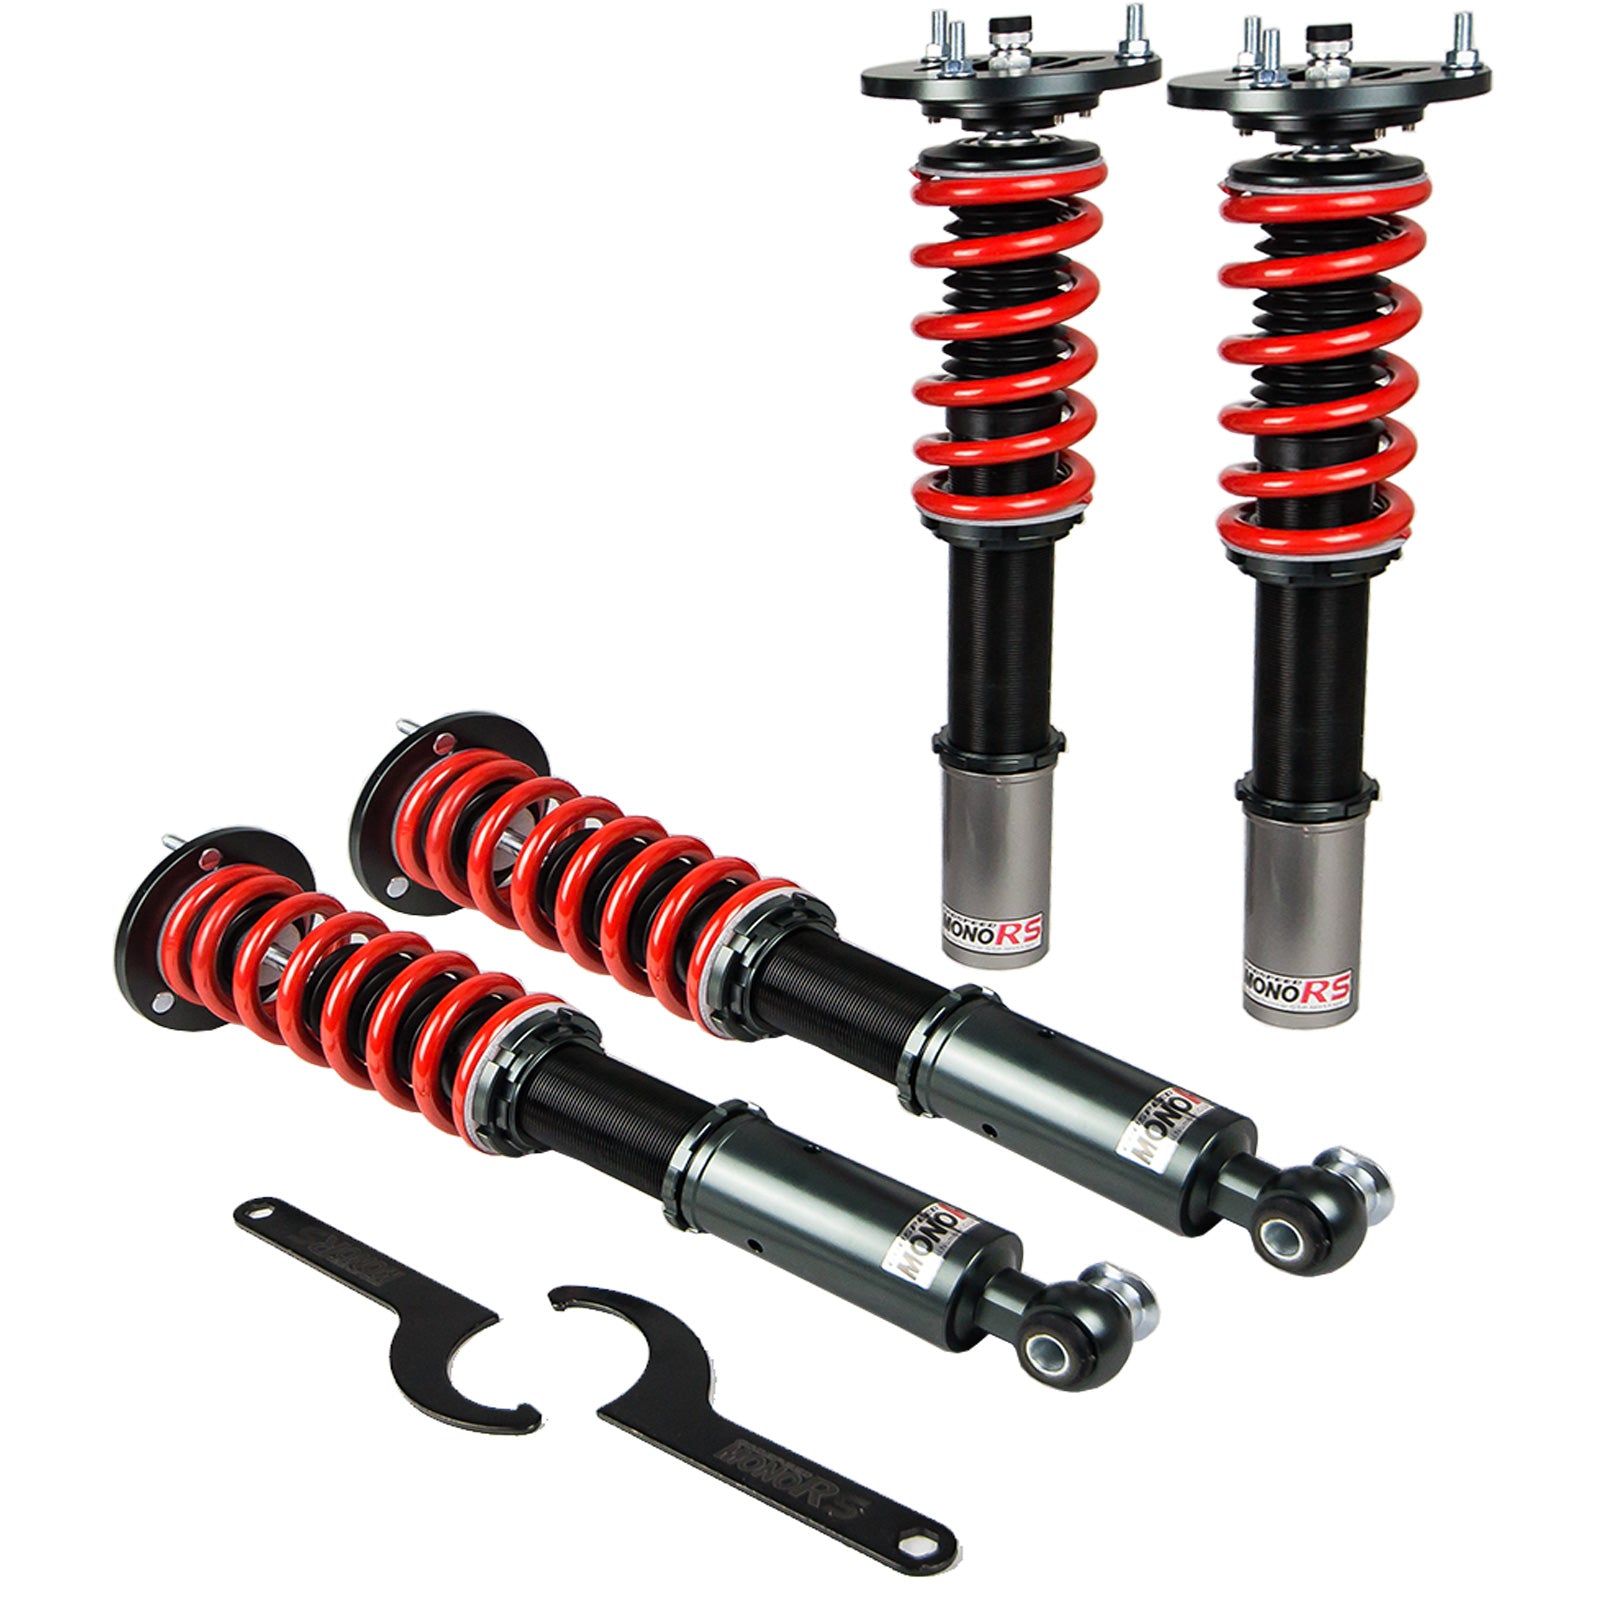 Godspeed MRS1920 MonoRS Coilover Lowering Kit, 32 Damping Adjustment, Ride Height Adjustable